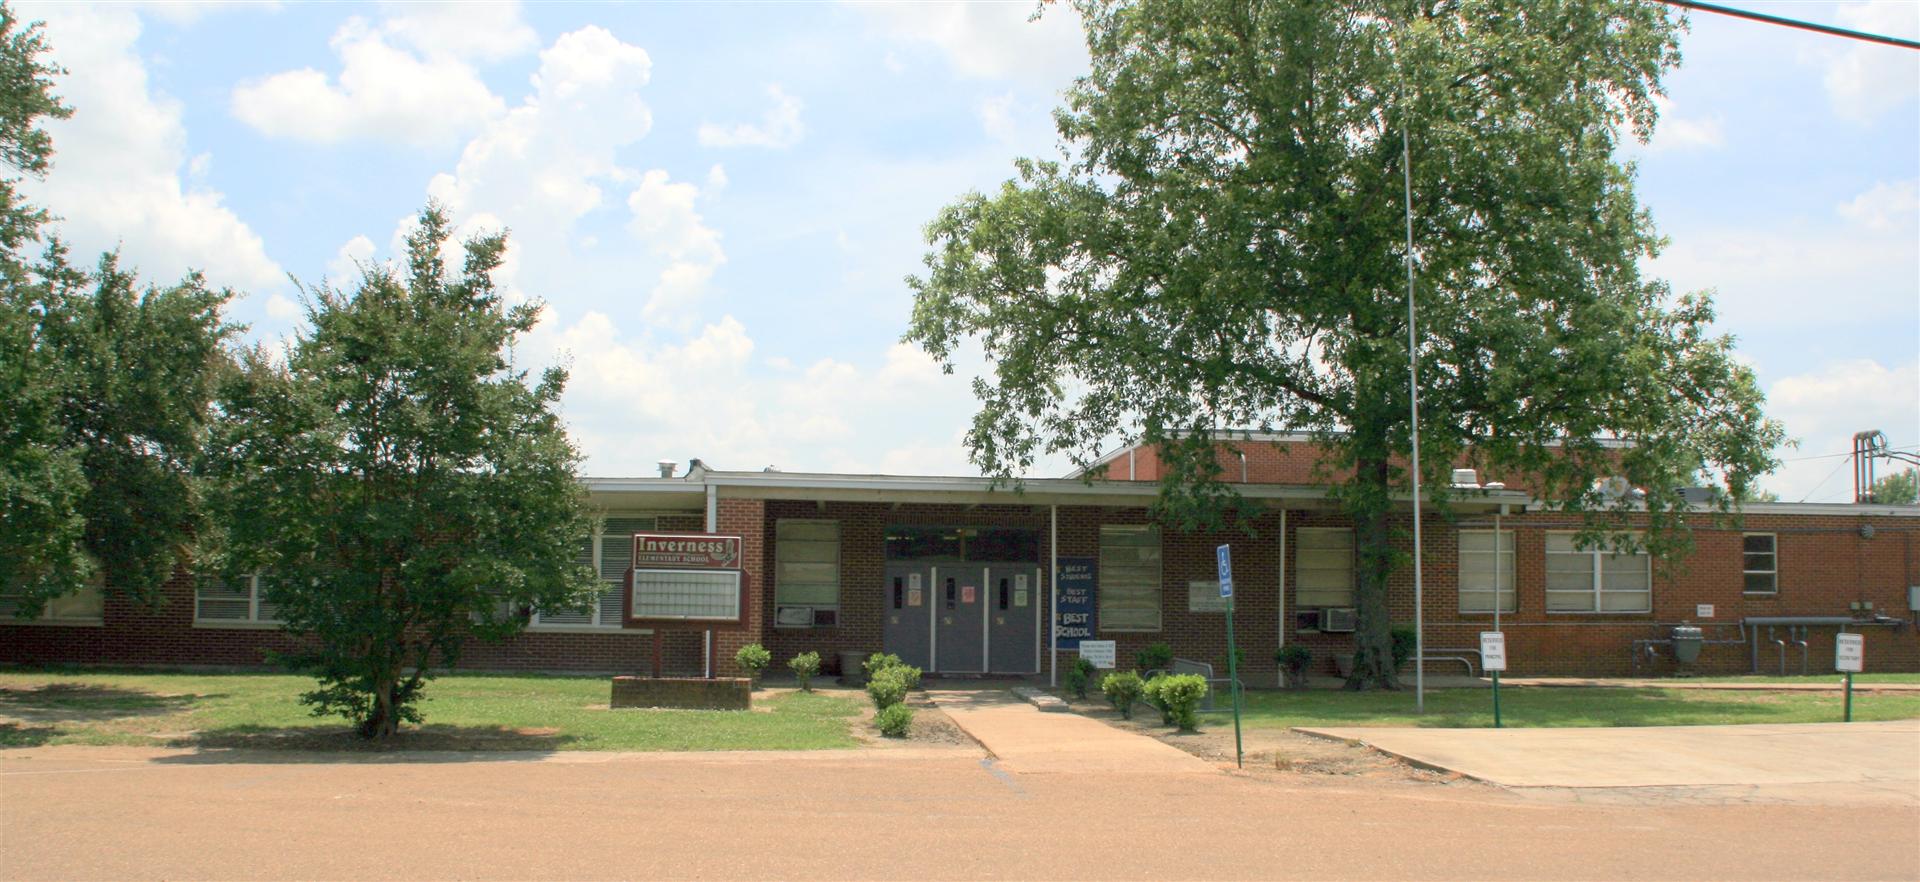 Cover Photo:  Inverness Elementary, Sunflower County Consolidated School District located in the Mississippi Delta.  Inverness serves students in Kindergarten through 8th grade.  We thank the principal of Inverness Elementary for granting us permission to use their photograph.